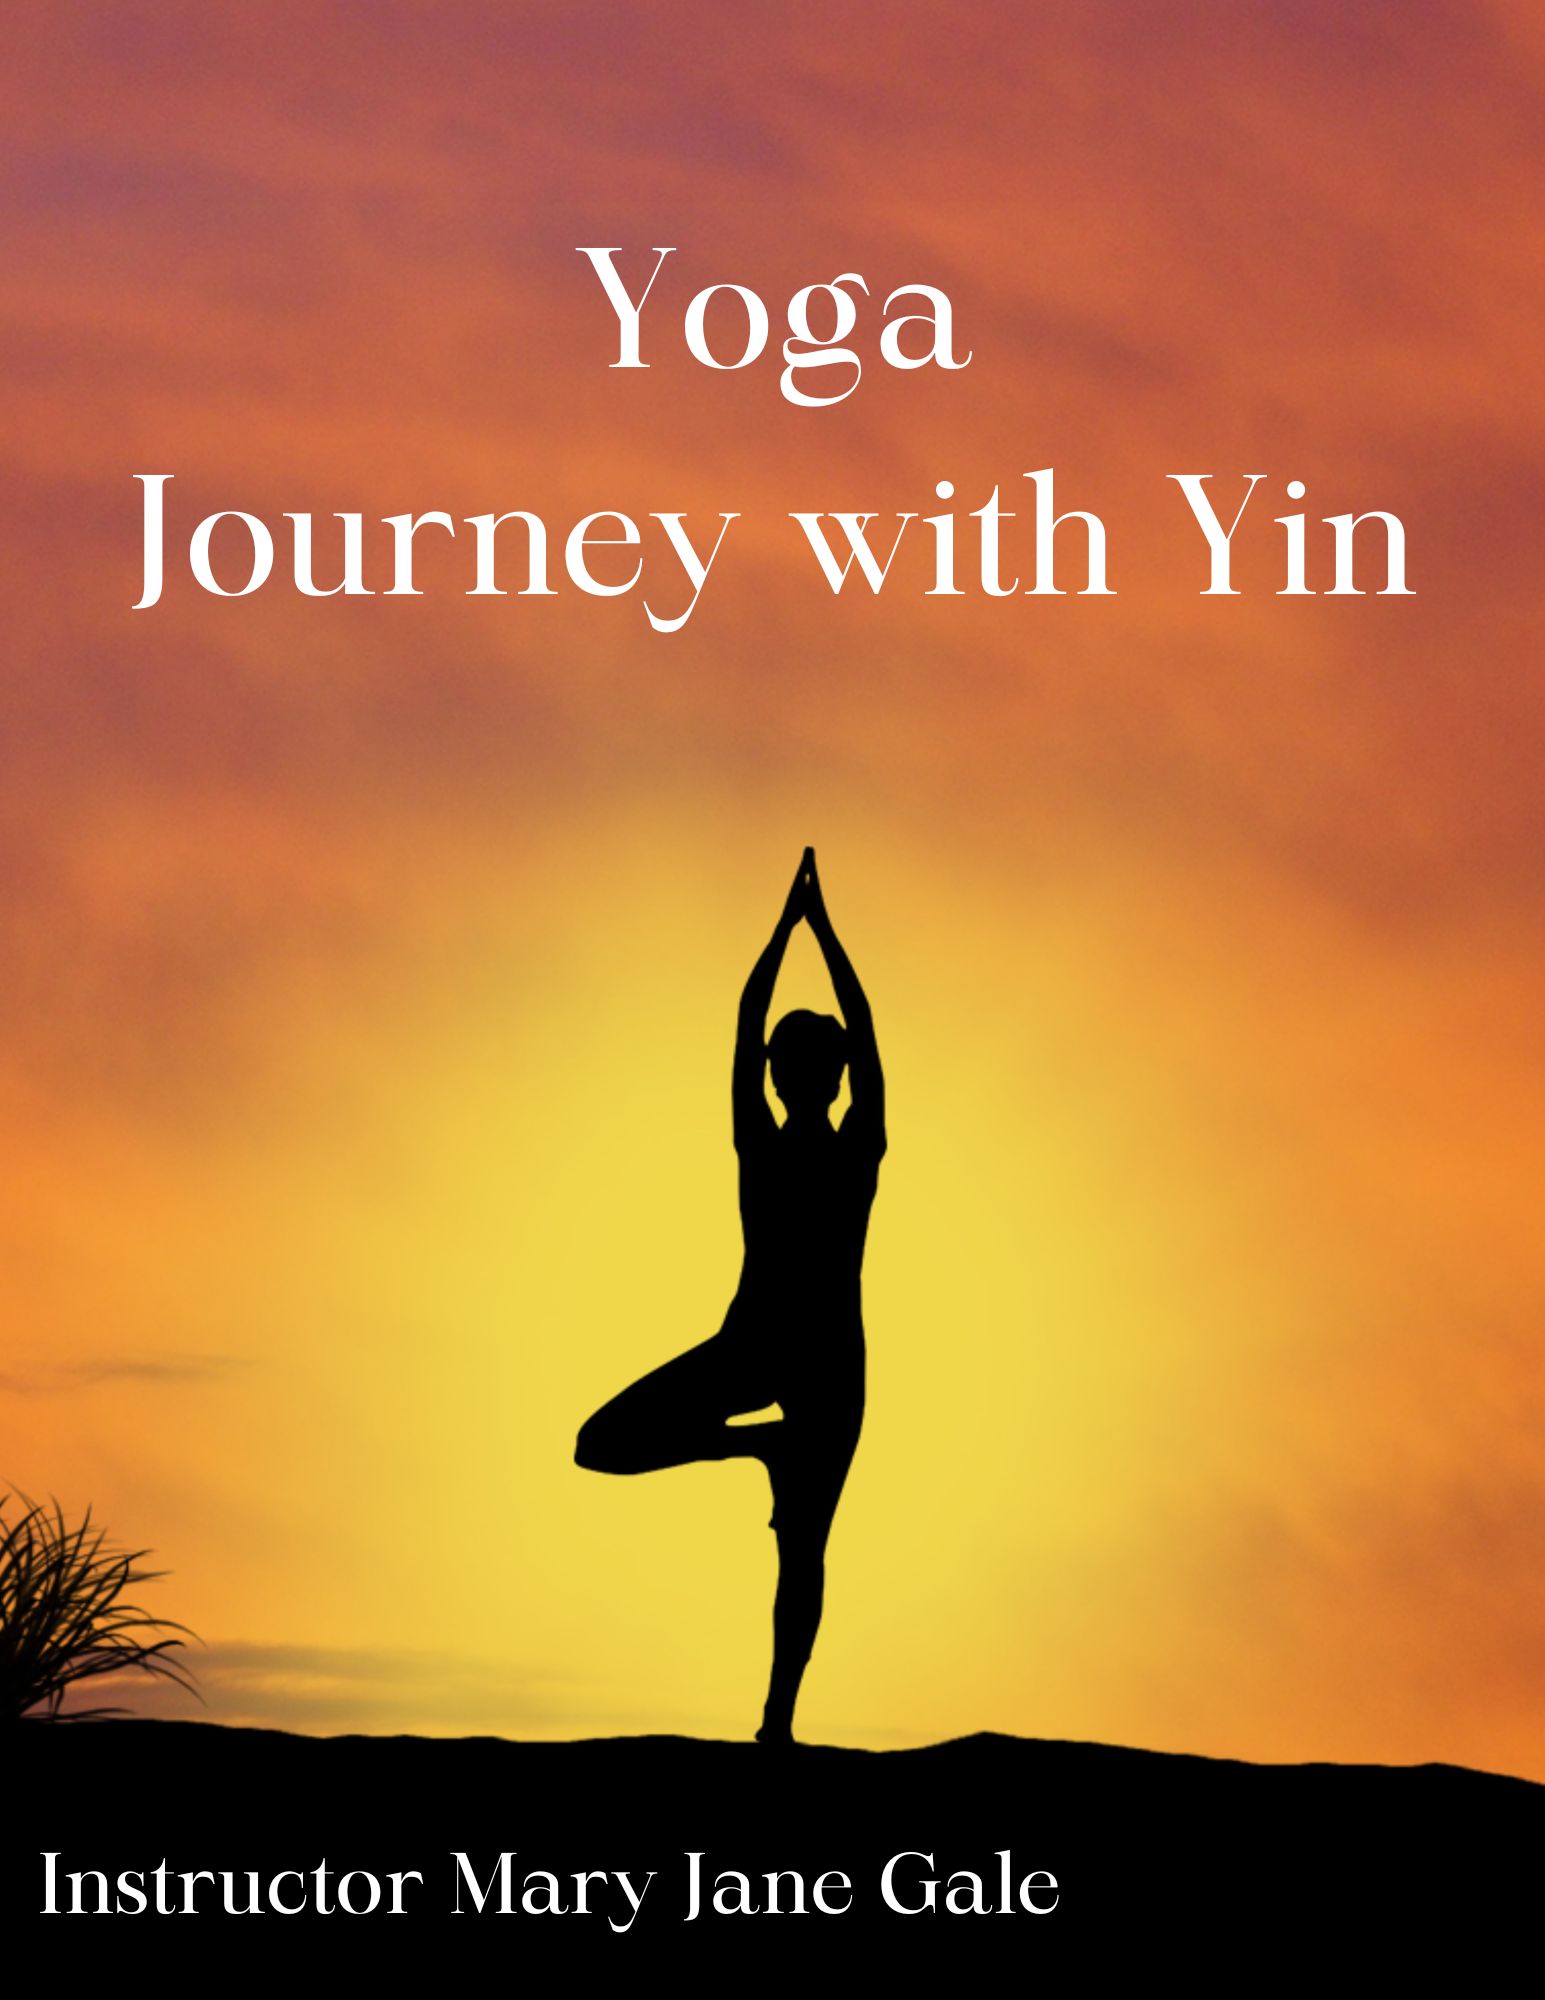 Sunset background with a woman doing a yoga pose standing up